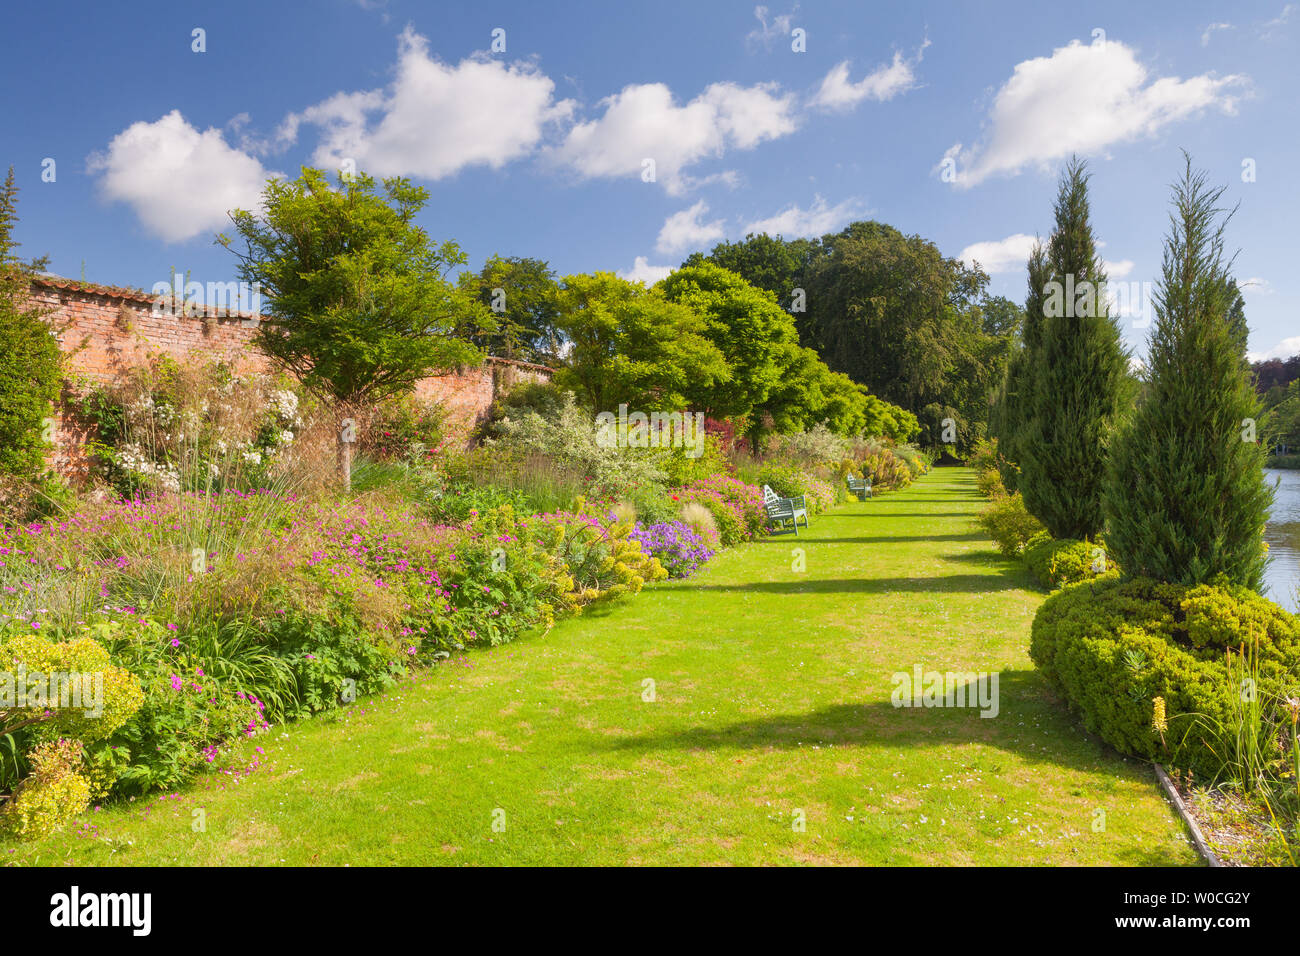 UK Weather: A bright morning at Elsham Gardens and Country Park. Elsham, North Lincolnshire, UK. 21st June 2019. Stock Photo